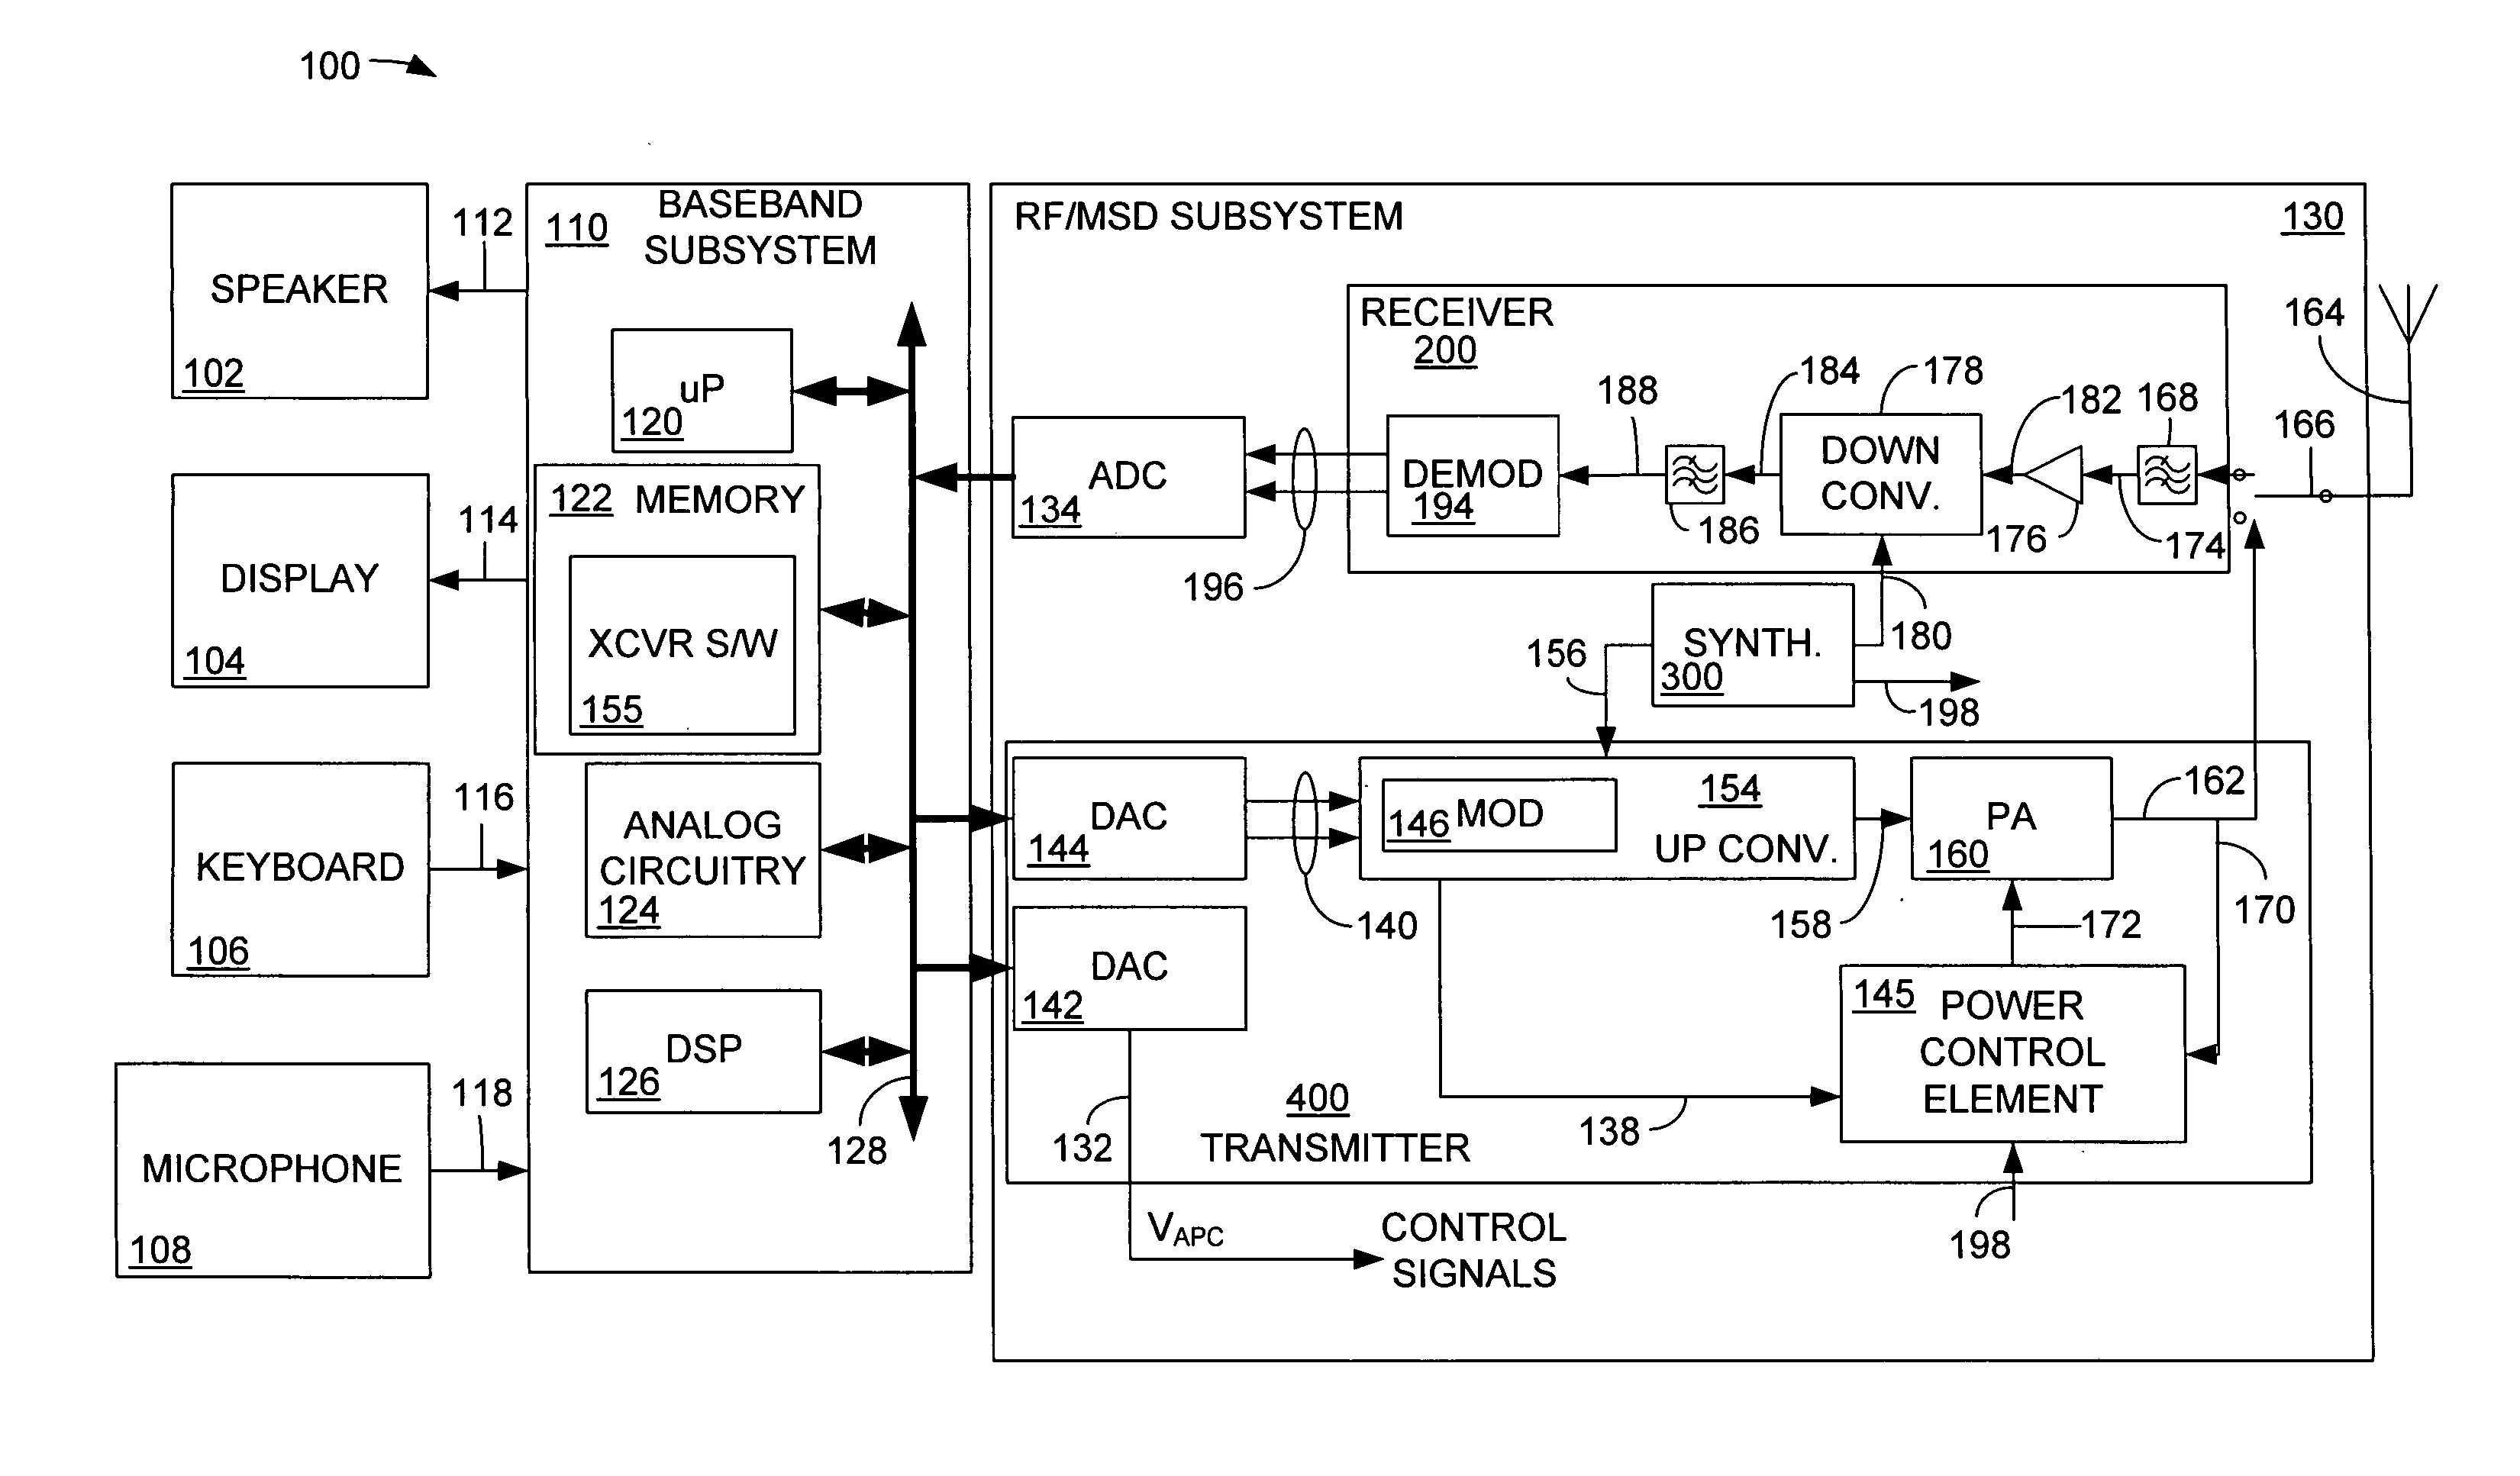 Single chip GSM/EDGE transceiver architecture with closed loop power control